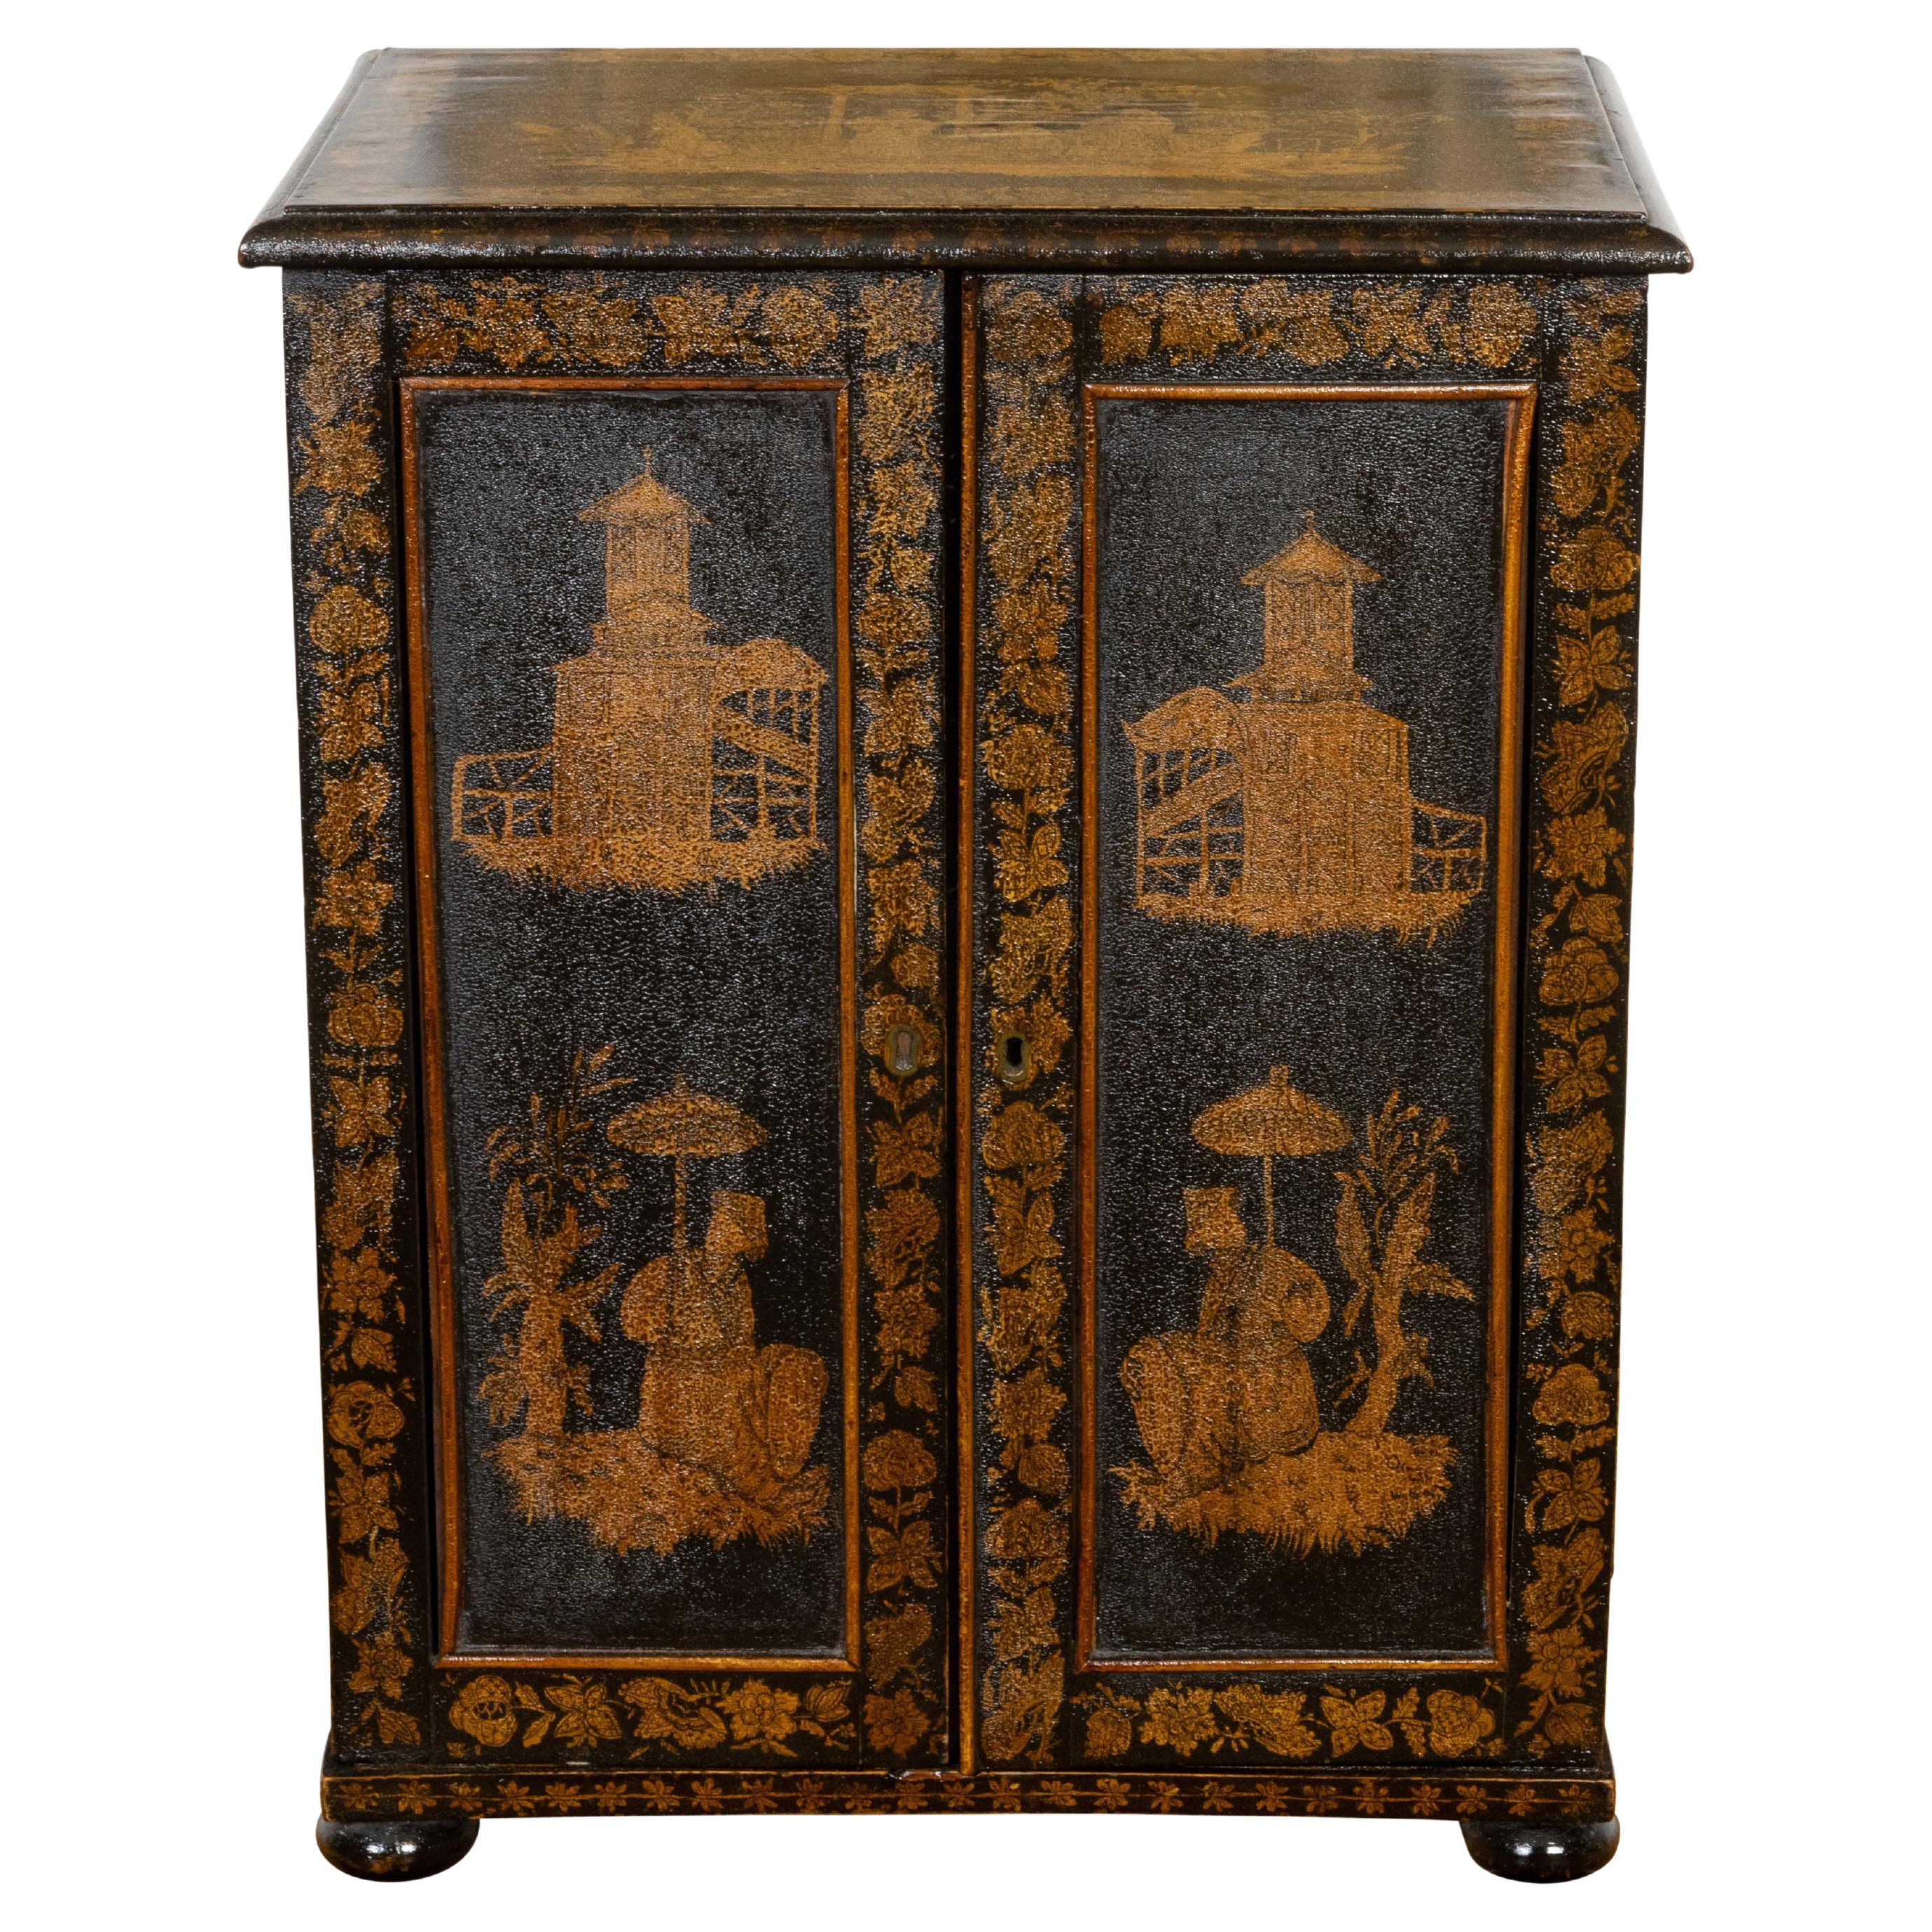 English 19th Century Black and Gold Chinoiserie Cabinet with Seven Drawers